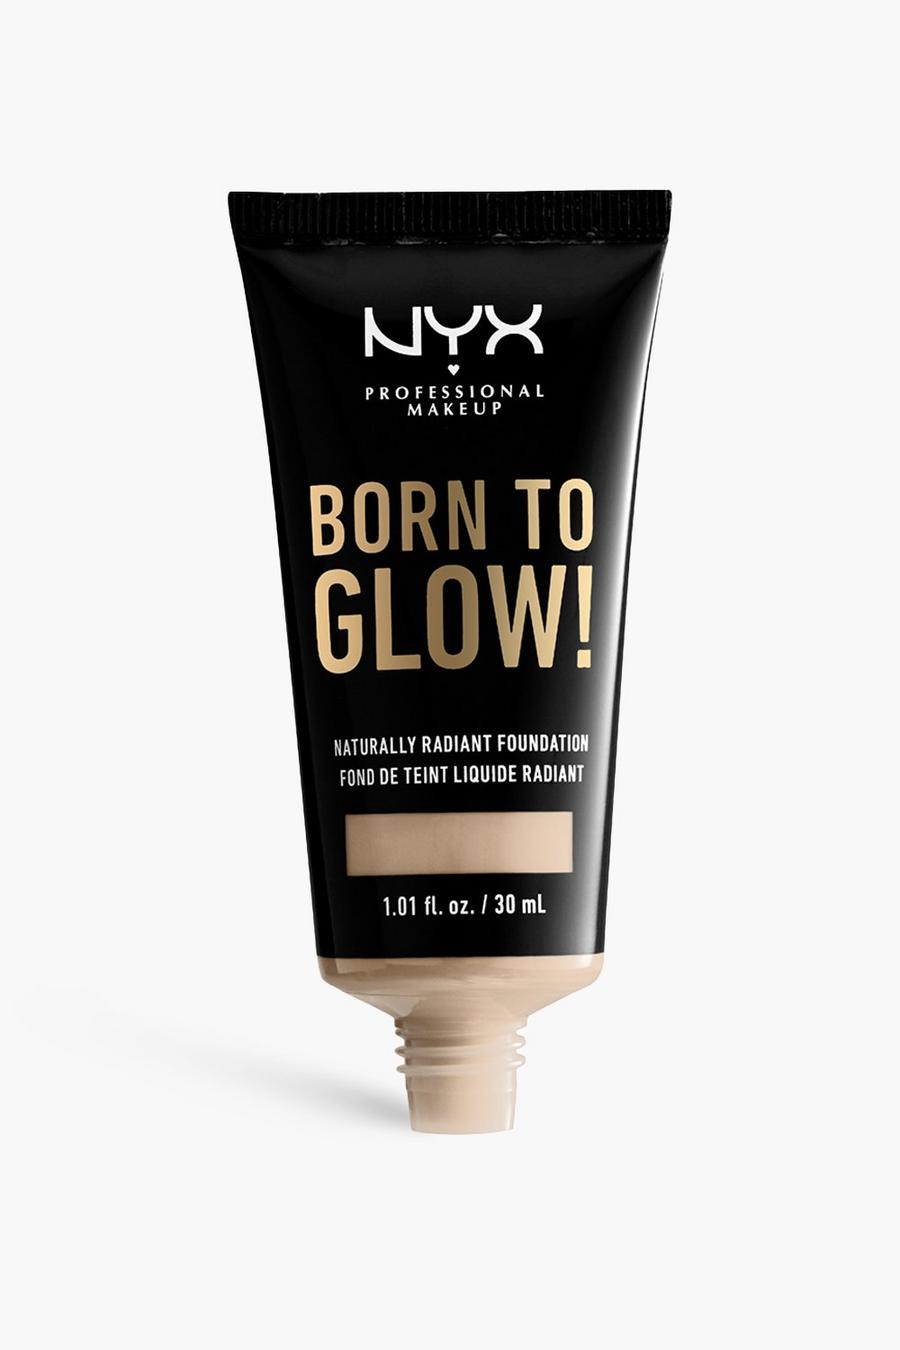 05 light NYX Professional Makeup Born To Glow! Naturally Radiant Foundation